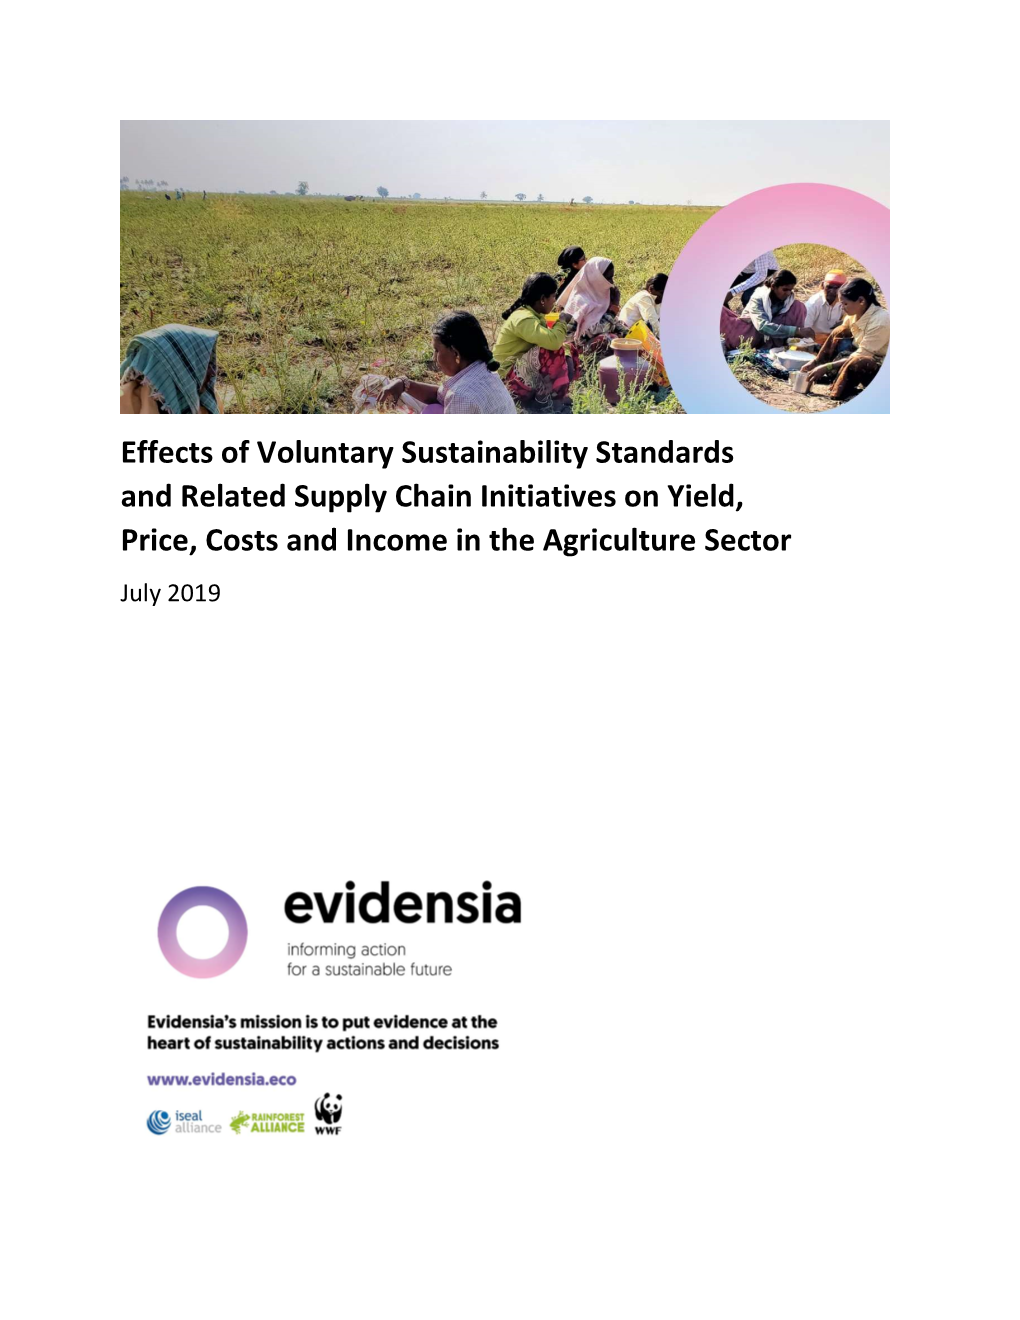 Effects of Voluntary Sustainability Standards and Related Supply Chain Initiatives on Yield, Price, Costs and Income in the Agriculture Sector July 2019